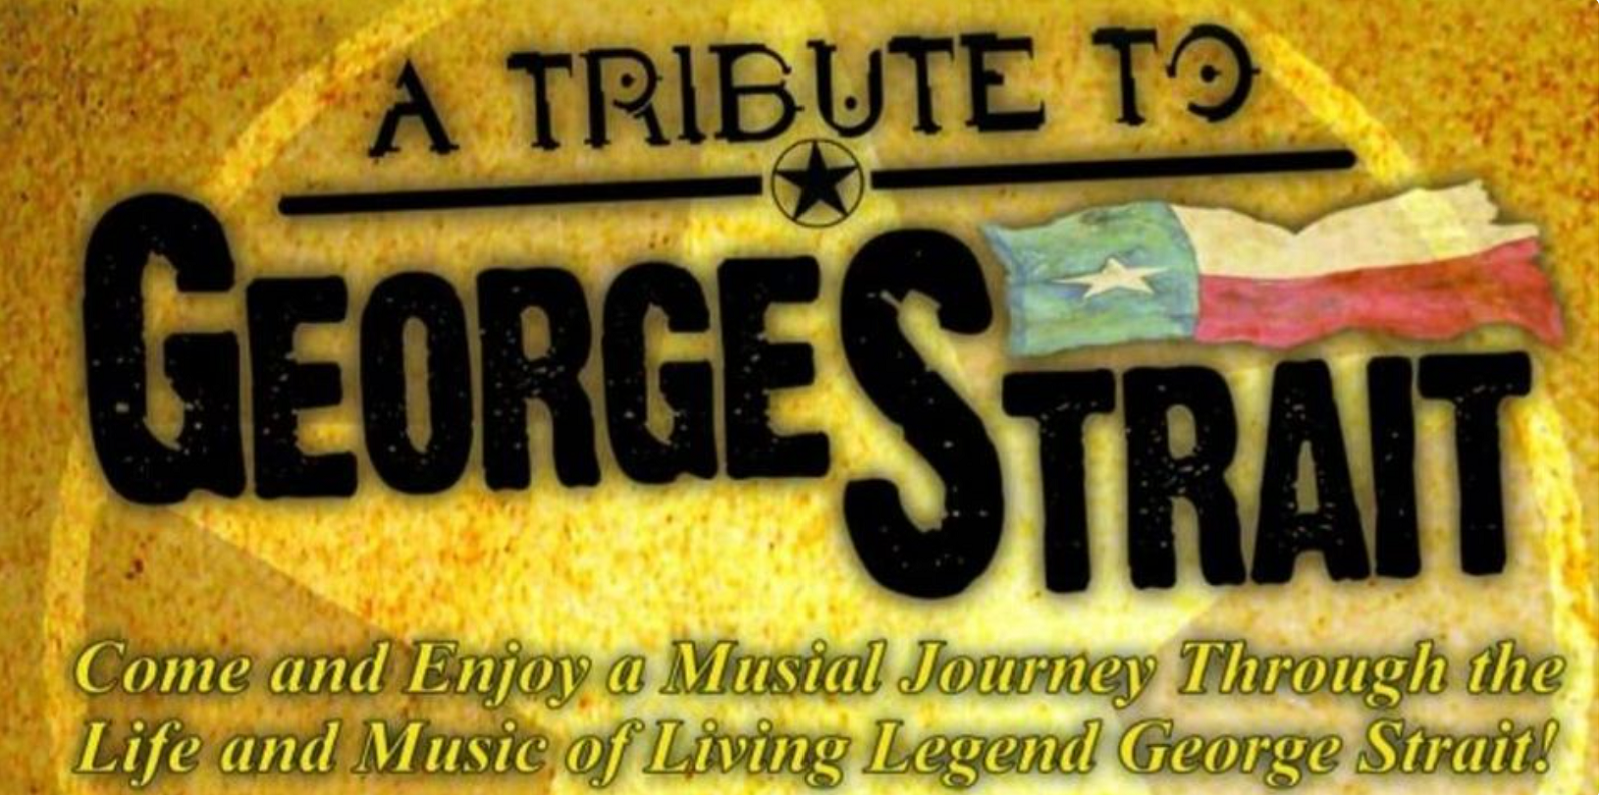 Get Your Tickets for the July 30th George Strait Tribute! This Fundraiser Keeps our Faulk County Transit Bus in Business! Main Photo